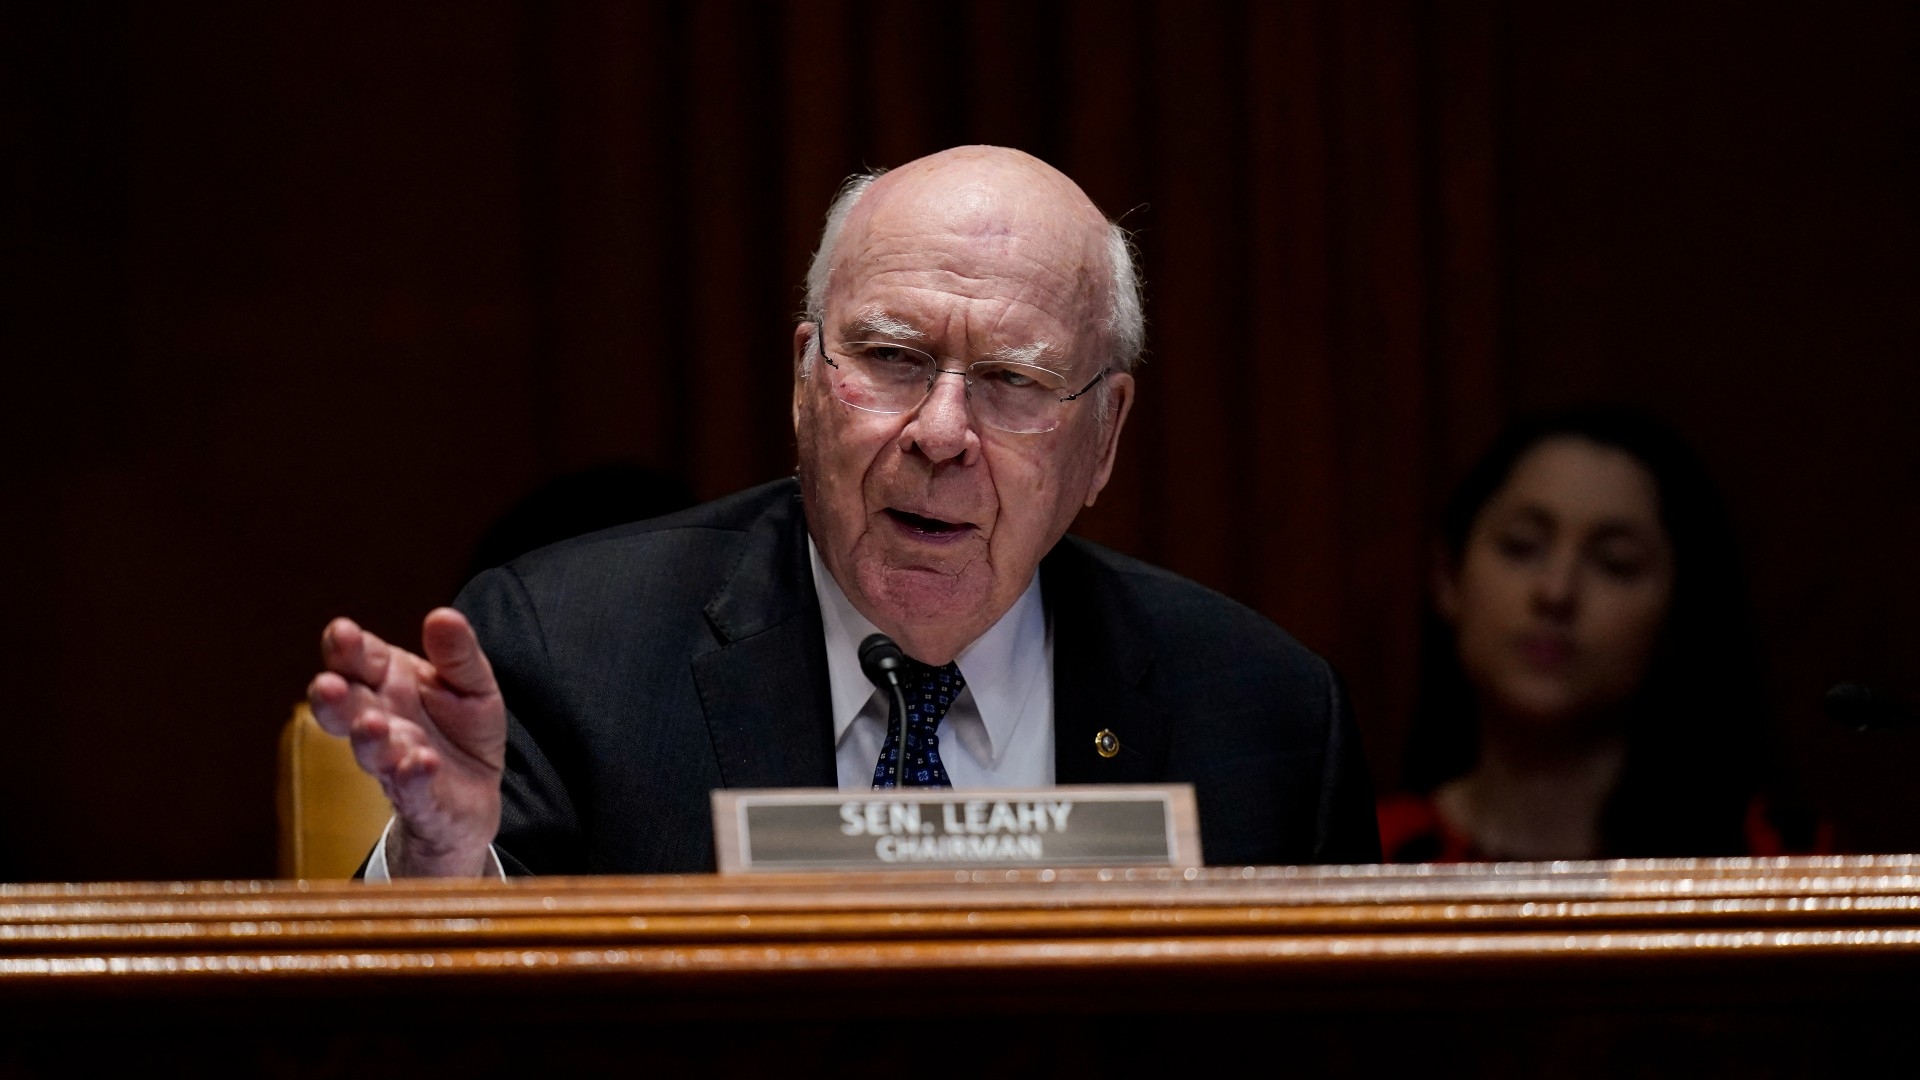 Senator Patrick Leahy speaks during a Senate Appropriations Subcommittee hearing on Capitol Hill in Washington, DC on 27 April 2022 (AFP)